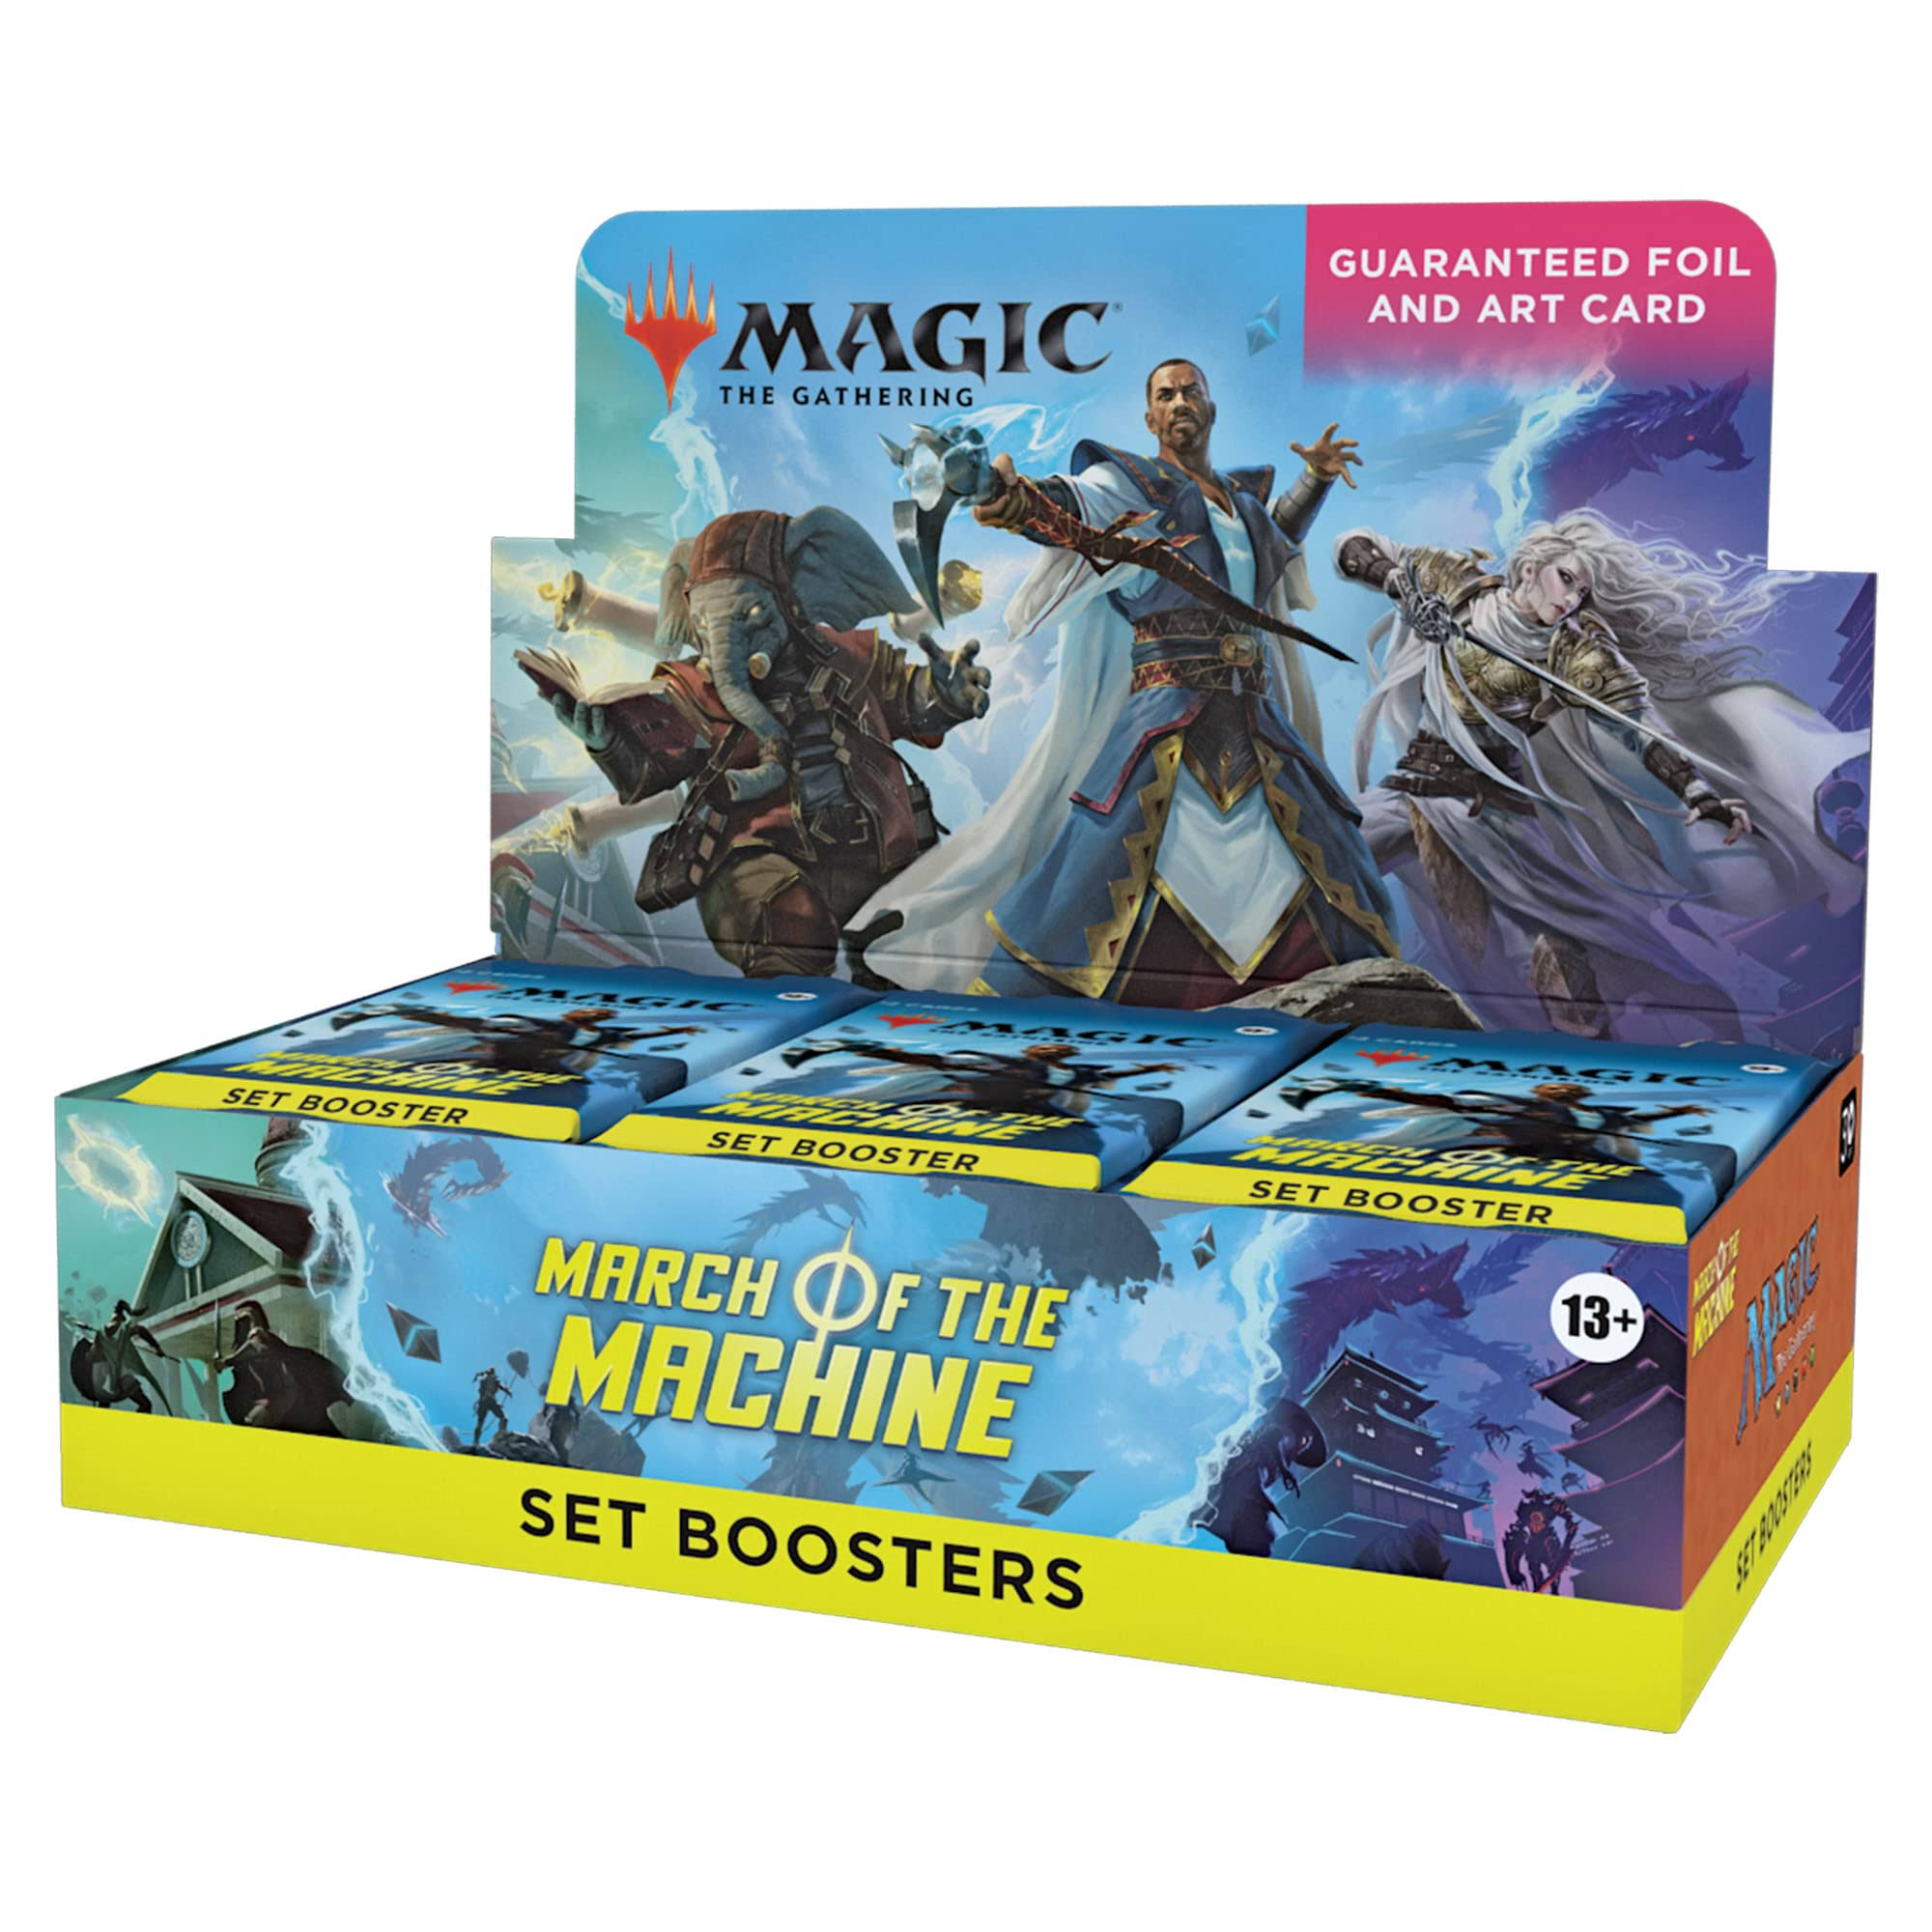 Magic The Gathering - March of The Machine - Set Booster Box